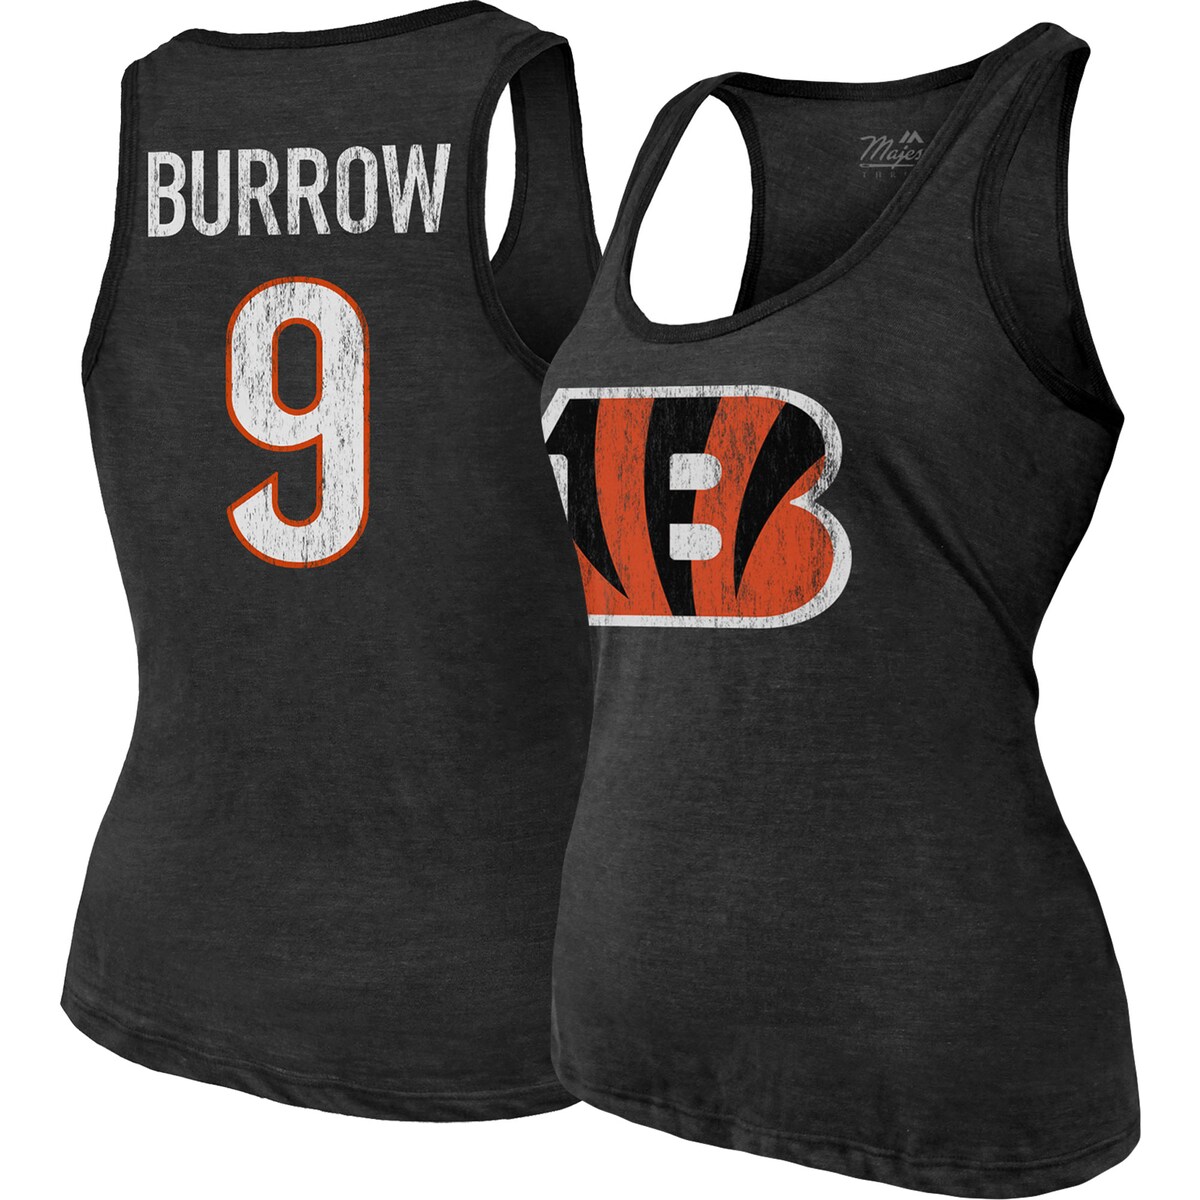 Rally on for Joe Burrow in this Cincinnati Bengals Player Name & Number Tri-Blend tank top from Majestic Threads!Distressed screen print graphicsOfficially licensedScoop neckHeathered fabricScoop neckMaterial: 50% Polyester/38% Cotton/12% RayonSleevelessMade in the USABrand: Majestic ThreadsMachine wash, tumble dry lowSleeveless